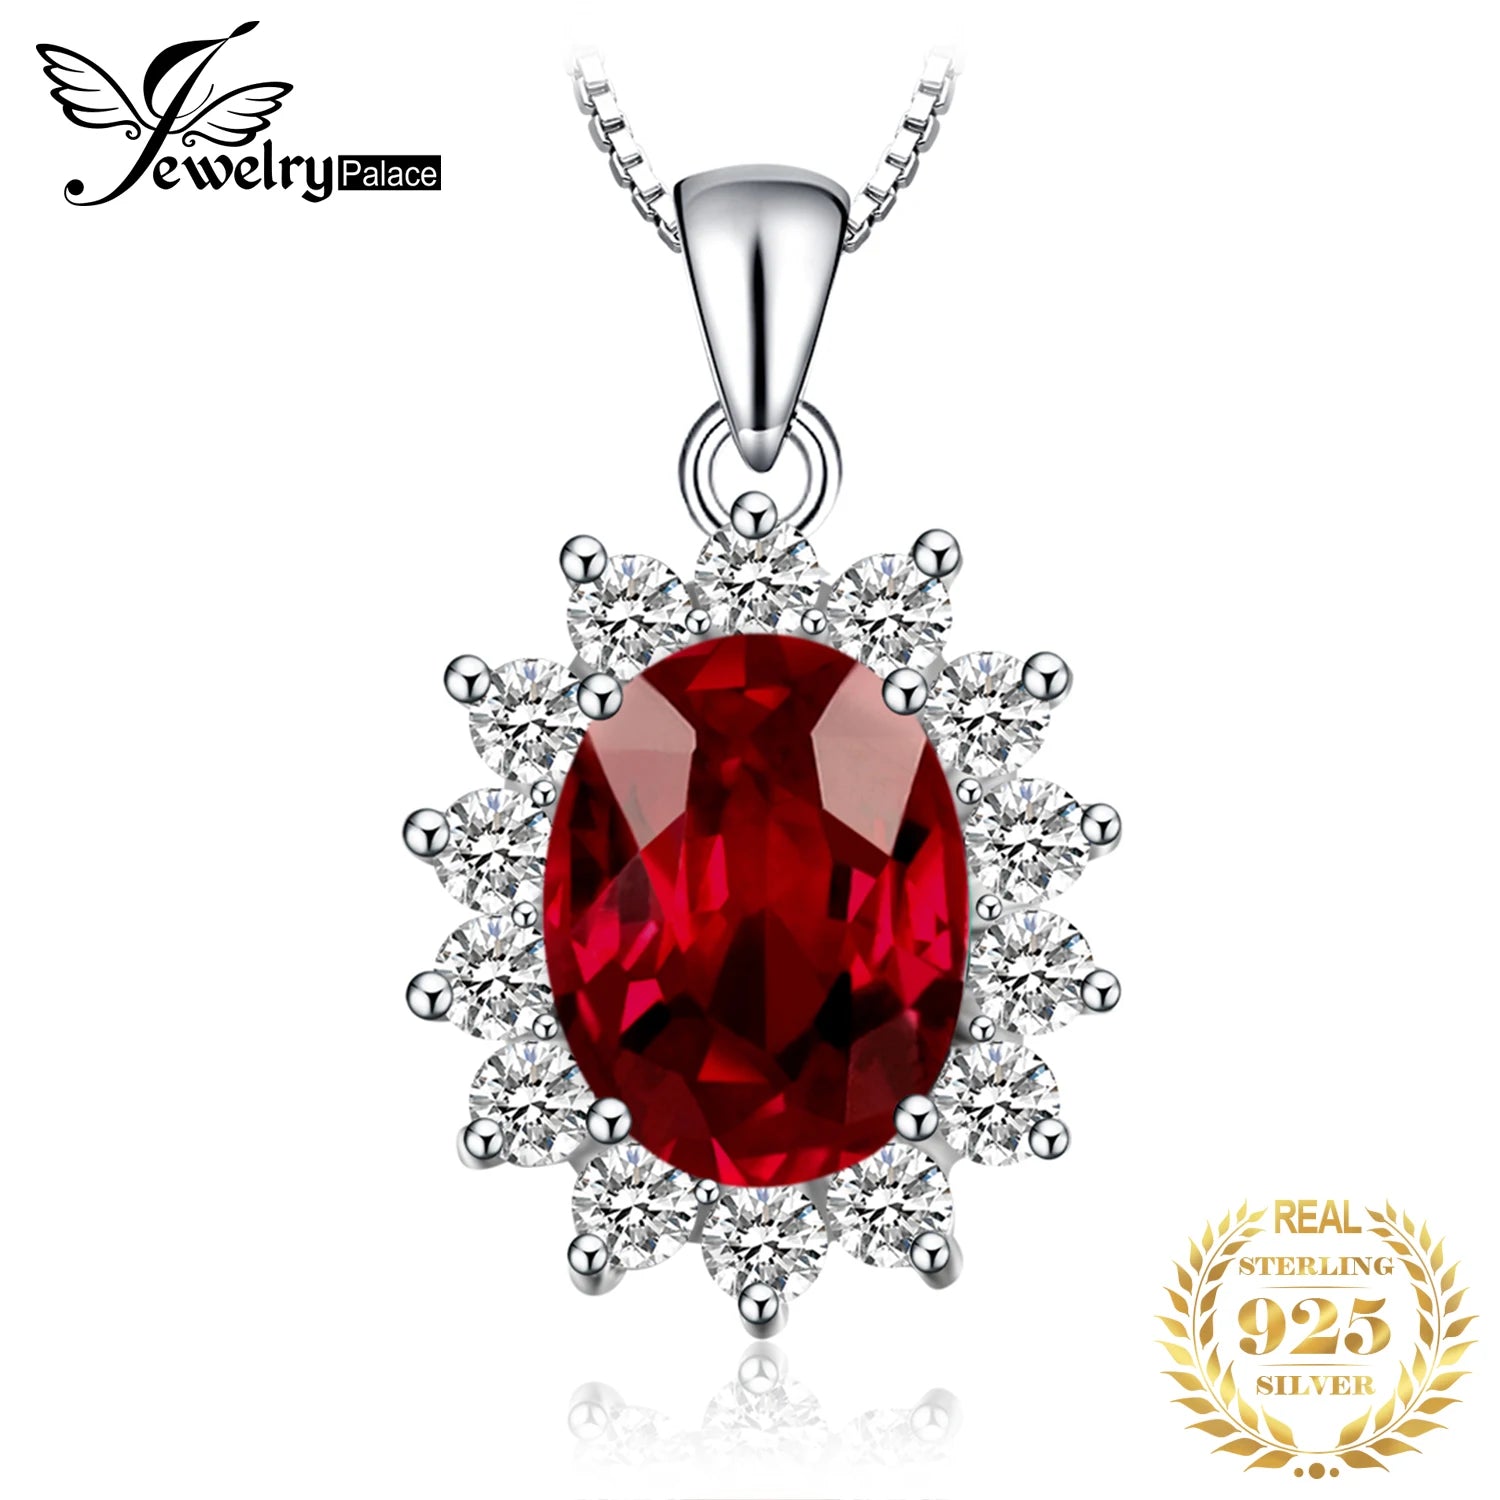 JewelryPalace 2.5ct Diana Natural Red Garnet 925 Sterling Silver Engagement Pendant Necklace for Woman Fashion Gift No Chain